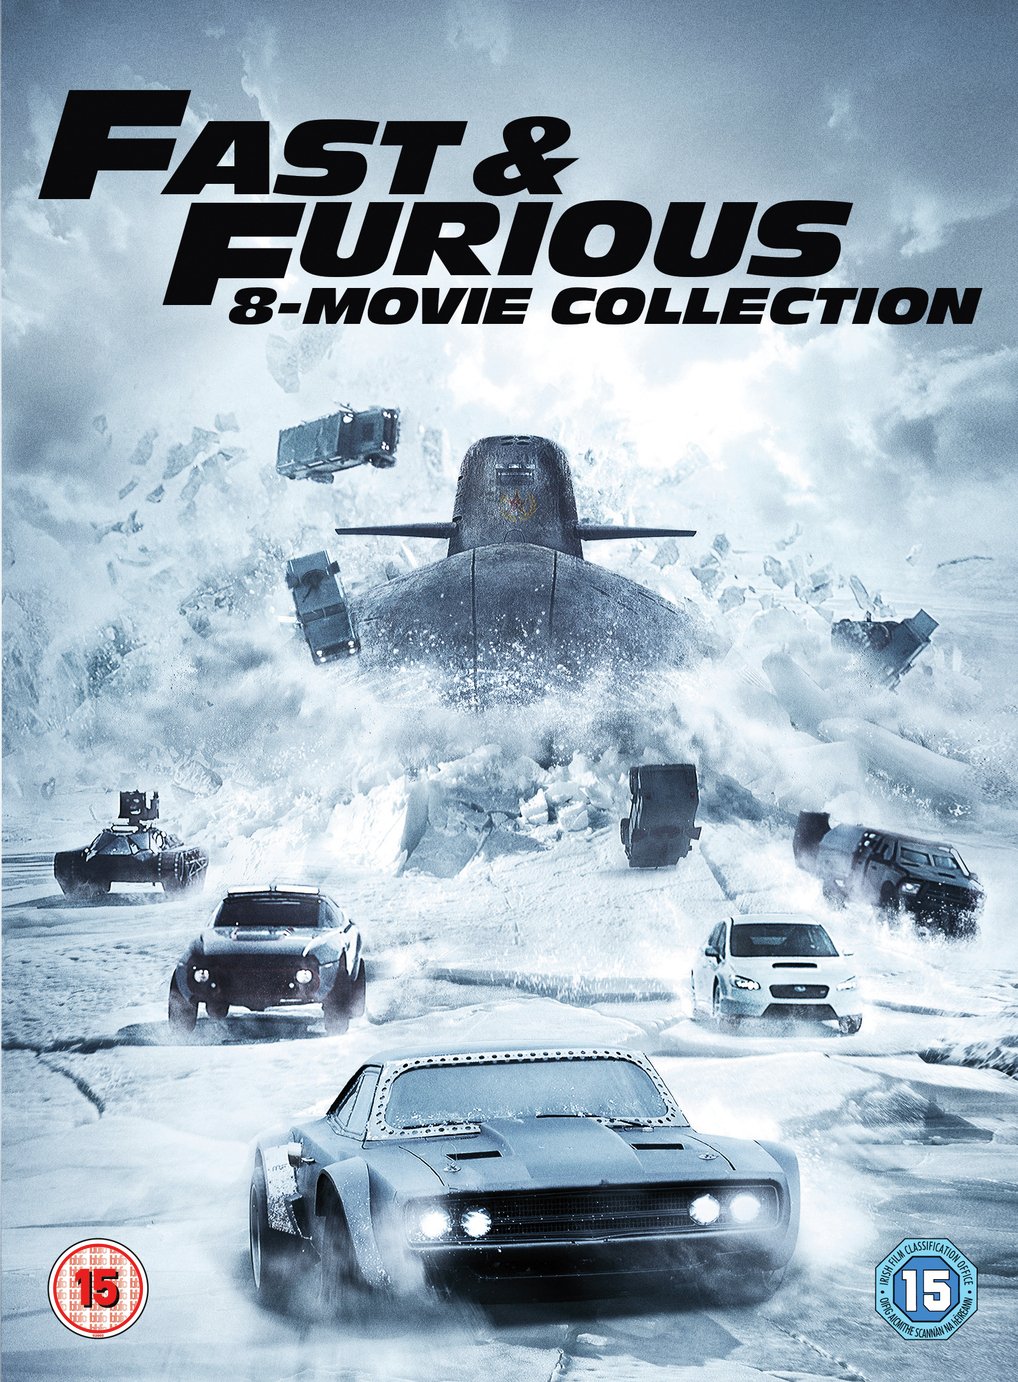 Fast & Furious 8 Film Collection DVD Box Set Review